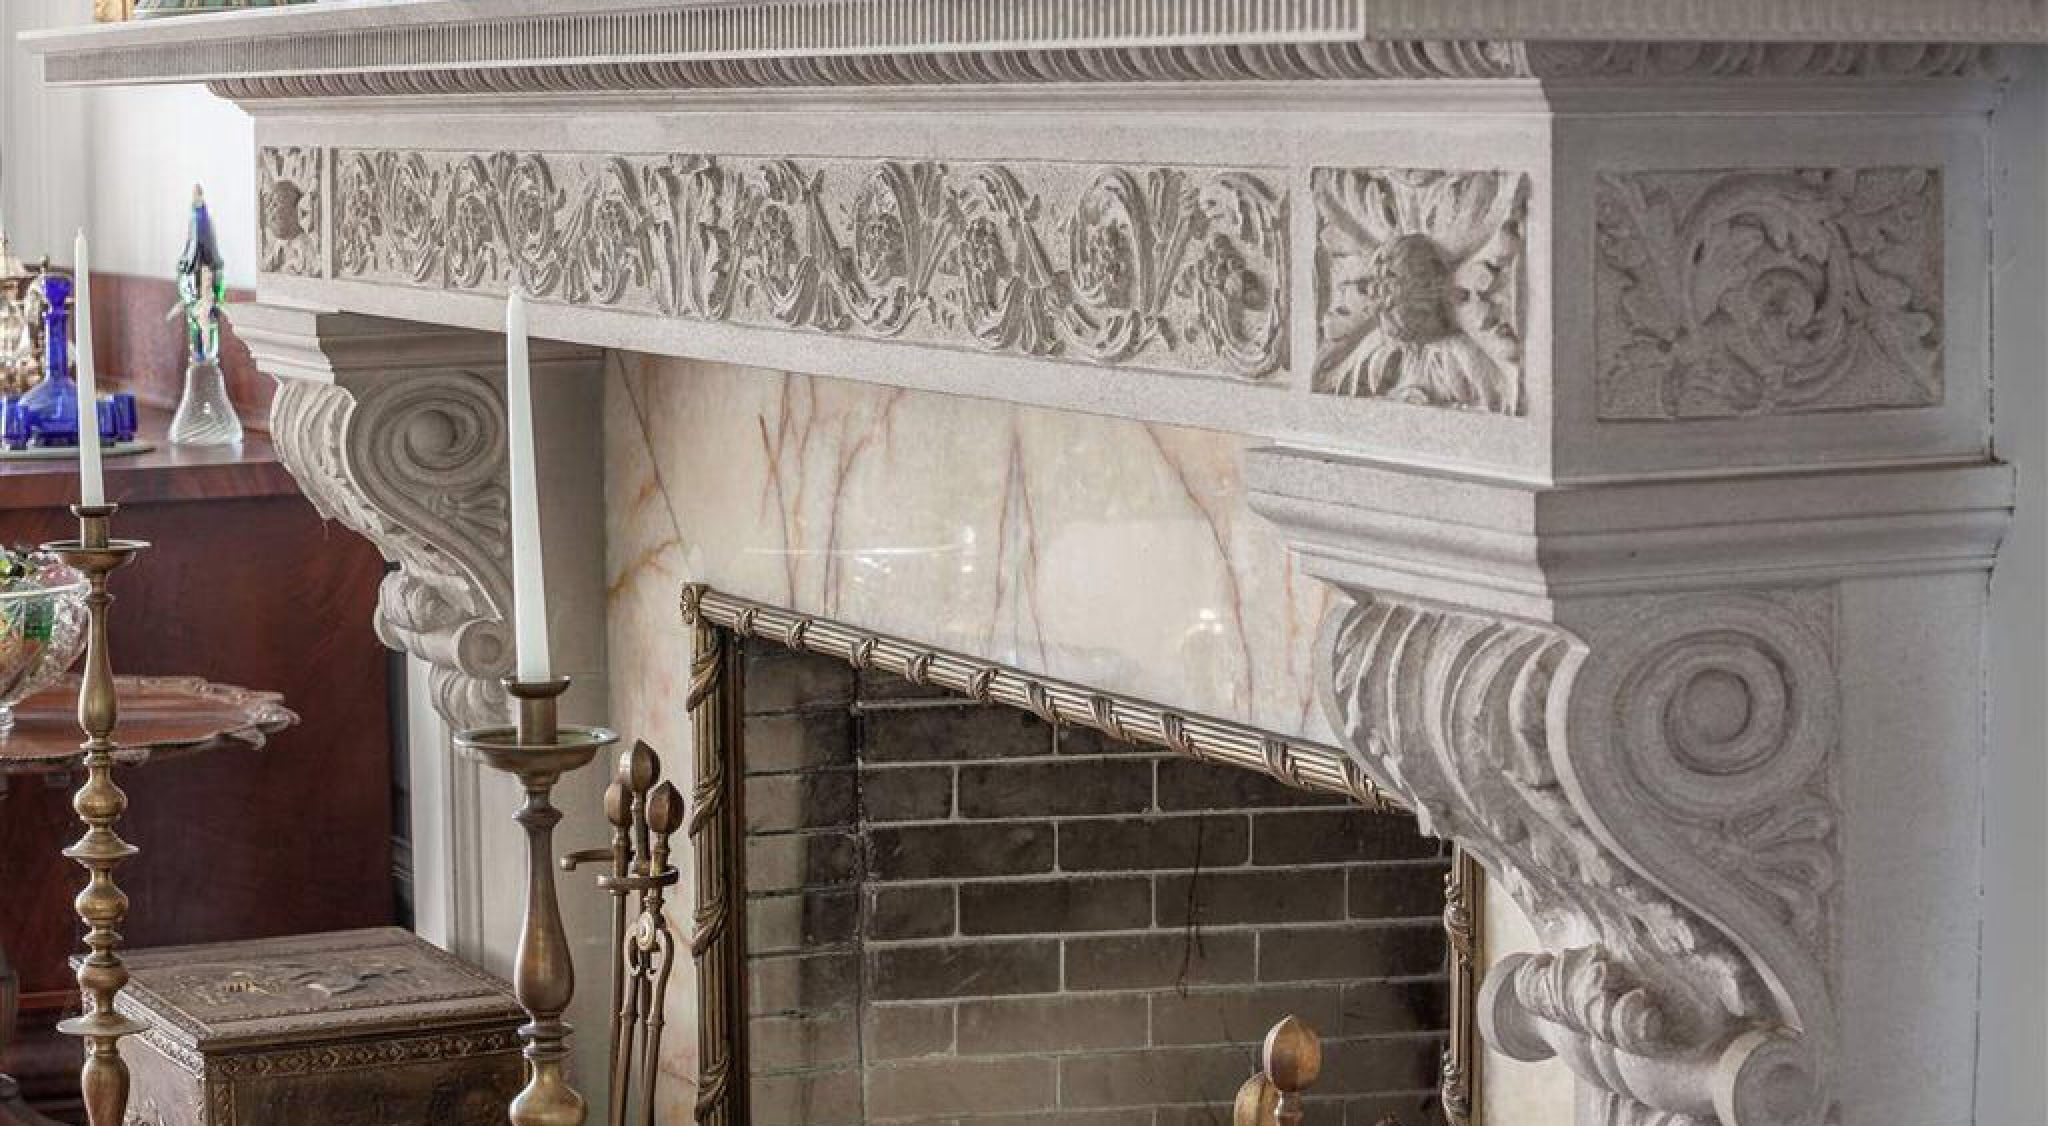 Mashup Monday: 10 Inspired Southern Vermont Fireplaces That Will Have You Planning Your Renovation